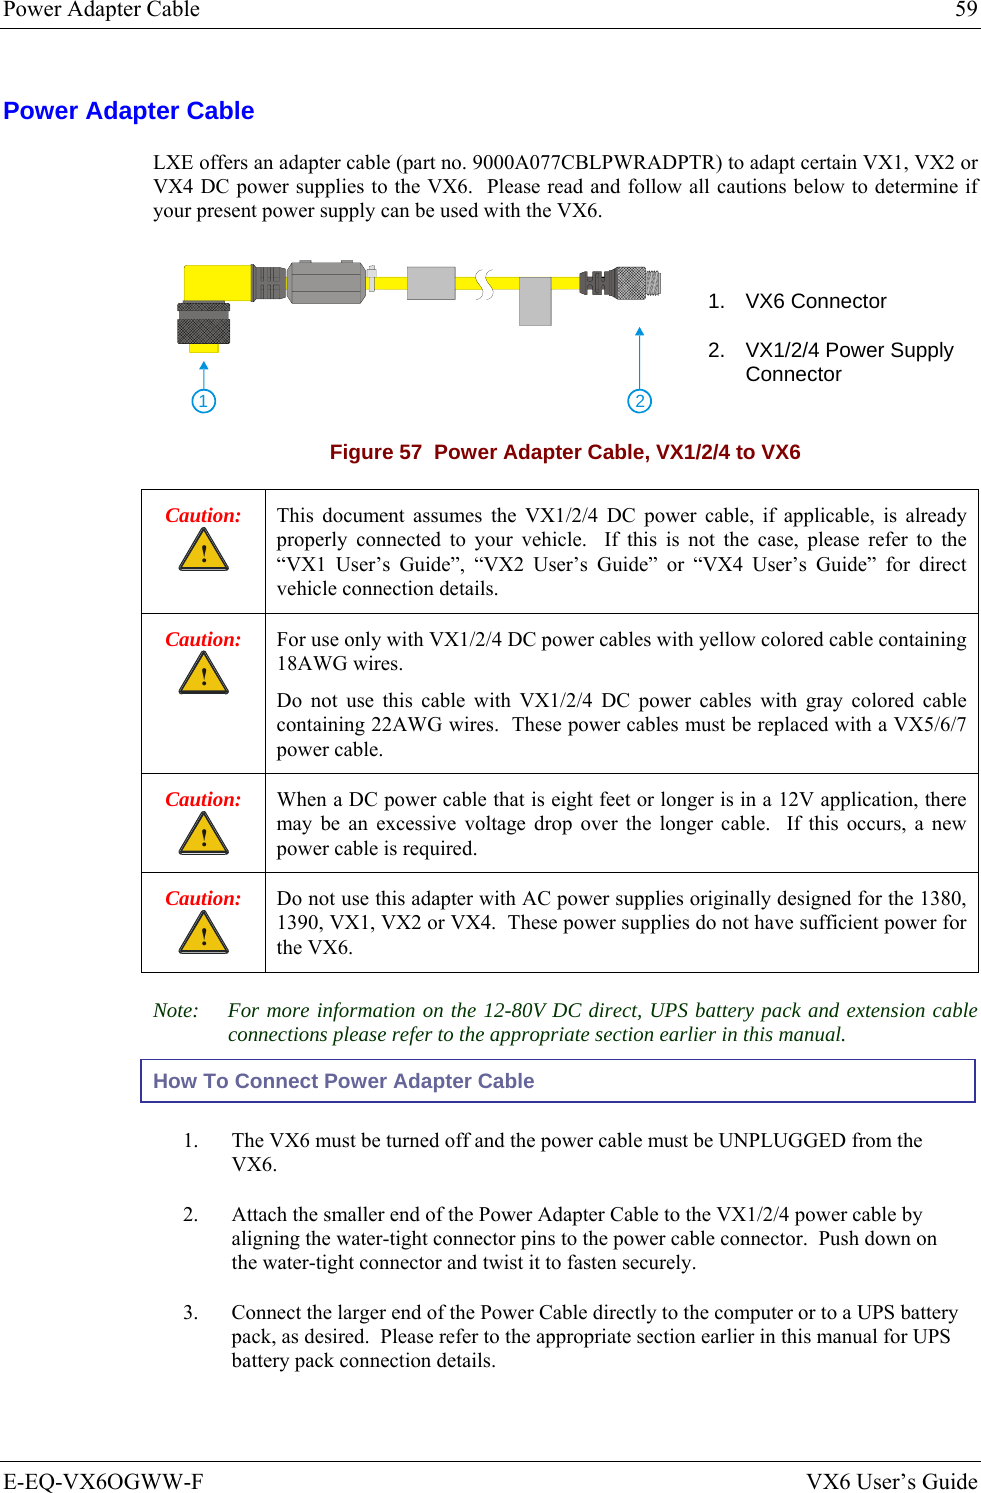 Power Adapter Cable  59 E-EQ-VX6OGWW-F  VX6 User’s Guide Power Adapter Cable LXE offers an adapter cable (part no. 9000A077CBLPWRADPTR) to adapt certain VX1, VX2 or VX4 DC power supplies to the VX6.  Please read and follow all cautions below to determine if your present power supply can be used with the VX6.    21 1. VX6 Connector 2.  VX1/2/4 Power Supply Connector Figure 57  Power Adapter Cable, VX1/2/4 to VX6 Caution: ! This document assumes the VX1/2/4 DC power cable, if applicable, is already properly connected to your vehicle.  If this is not the case, please refer to the “VX1 User’s Guide”, “VX2 User’s Guide” or “VX4 User’s Guide” for direct vehicle connection details. Caution: ! For use only with VX1/2/4 DC power cables with yellow colored cable containing 18AWG wires. Do not use this cable with VX1/2/4 DC power cables with gray colored cable containing 22AWG wires.  These power cables must be replaced with a VX5/6/7 power cable. Caution: ! When a DC power cable that is eight feet or longer is in a 12V application, there may be an excessive voltage drop over the longer cable.  If this occurs, a new power cable is required. Caution: ! Do not use this adapter with AC power supplies originally designed for the 1380, 1390, VX1, VX2 or VX4.  These power supplies do not have sufficient power for the VX6. Note:  For more information on the 12-80V DC direct, UPS battery pack and extension cable connections please refer to the appropriate section earlier in this manual. How To Connect Power Adapter Cable 1.  The VX6 must be turned off and the power cable must be UNPLUGGED from the VX6. 2.  Attach the smaller end of the Power Adapter Cable to the VX1/2/4 power cable by aligning the water-tight connector pins to the power cable connector.  Push down on the water-tight connector and twist it to fasten securely. 3.  Connect the larger end of the Power Cable directly to the computer or to a UPS battery pack, as desired.  Please refer to the appropriate section earlier in this manual for UPS battery pack connection details. 